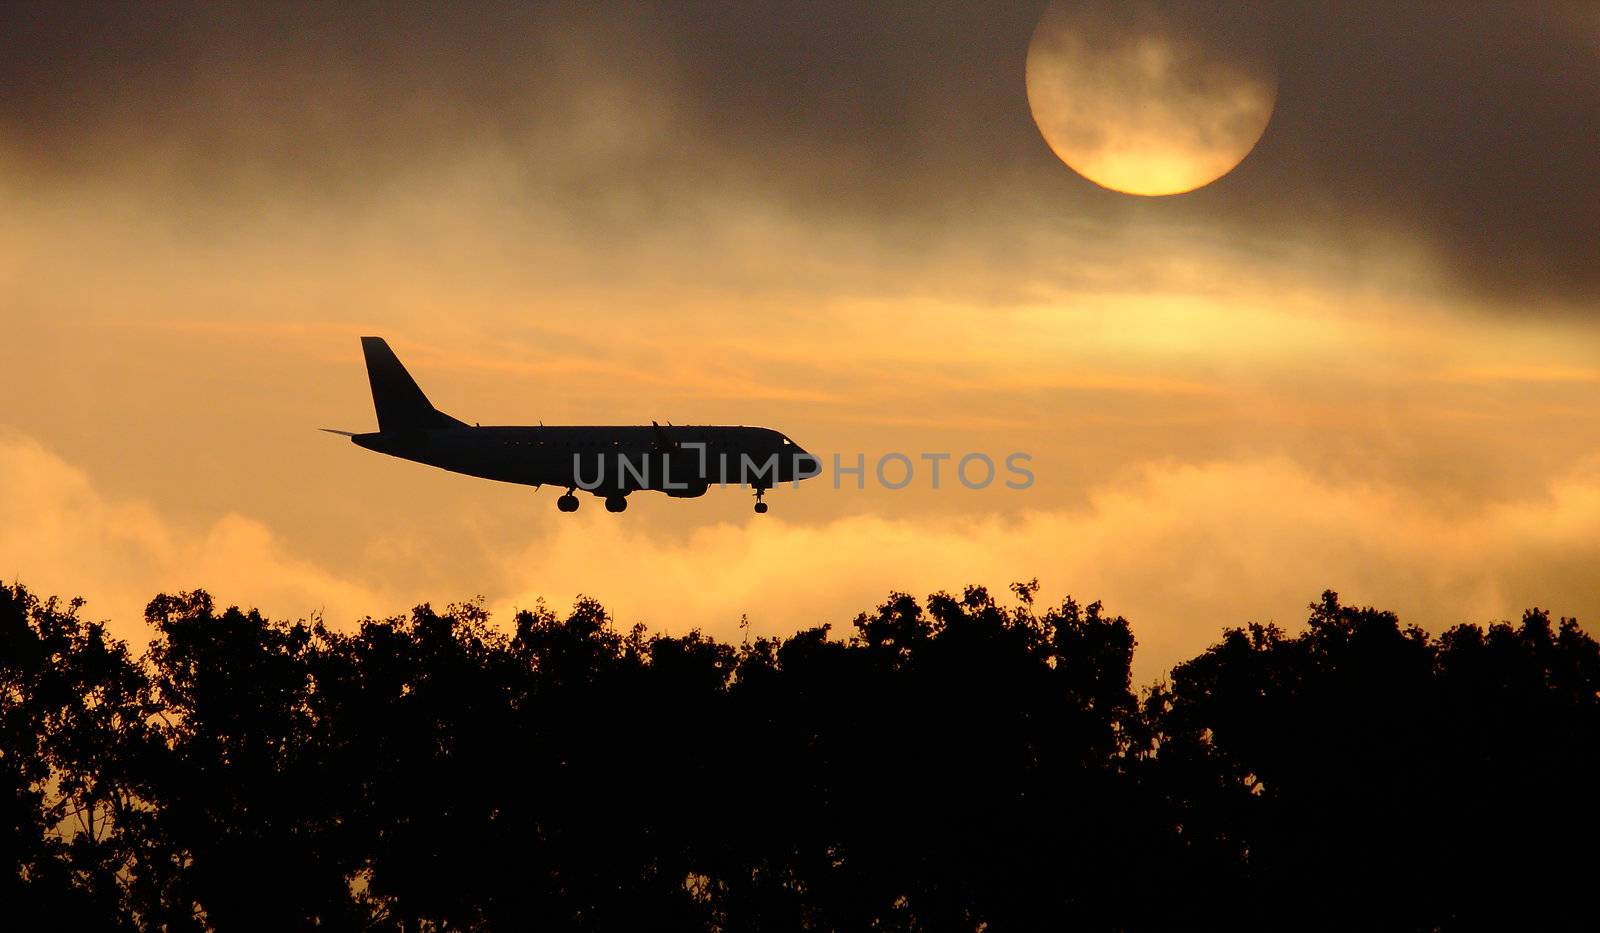 Silhouette of the big plane on a sunrise background